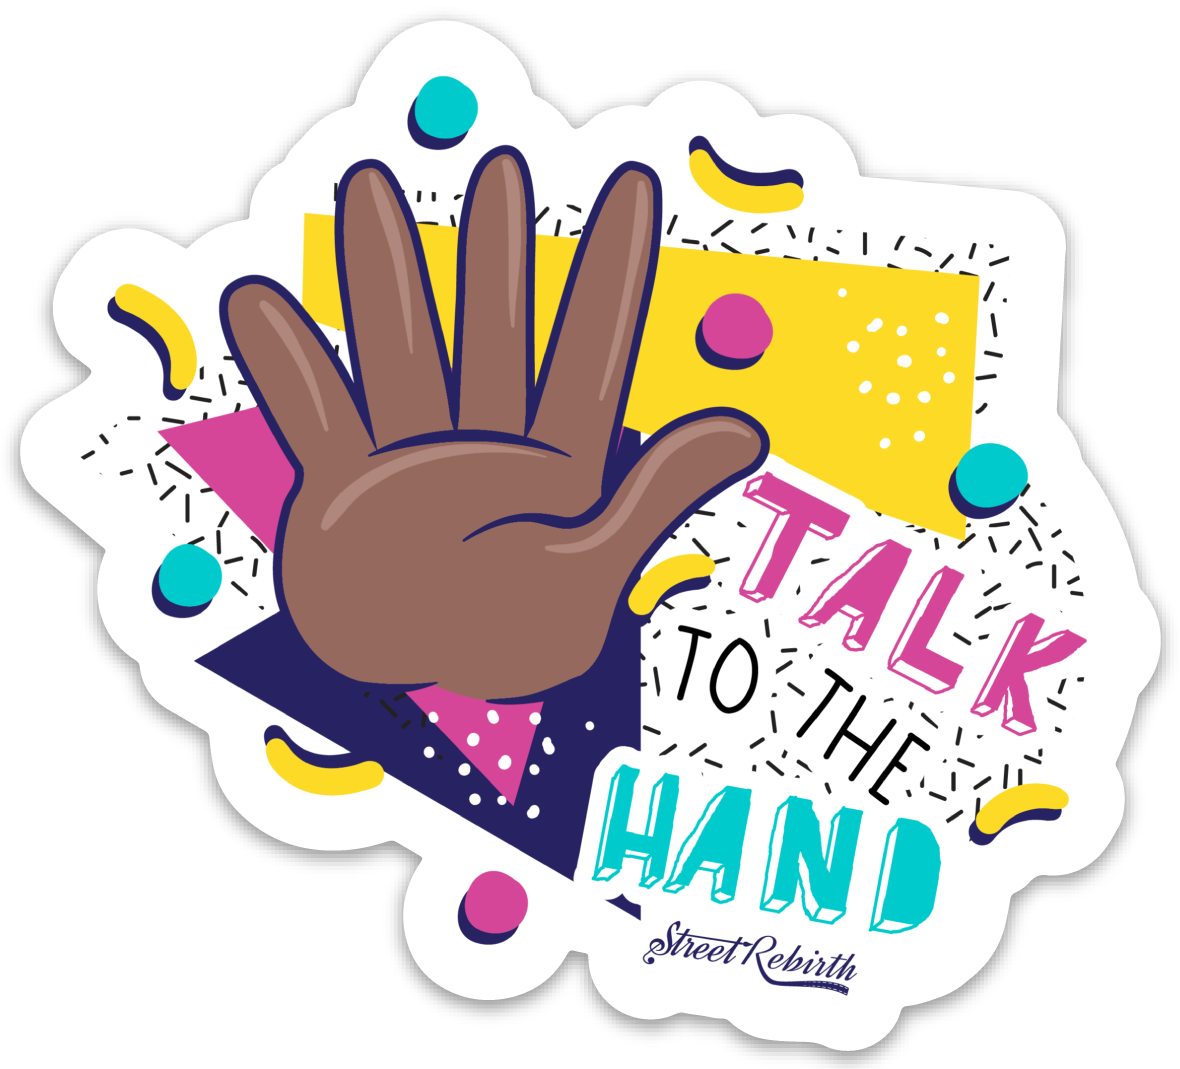 Talk to the Hand PUN STICKER – ONE 4 INCH WATER PROOF VINYL STICKER – FOR HYDRO FLASK, SKATEBOARD, LAPTOP, PLANNER, CAR, COLLECTING, GIFTING